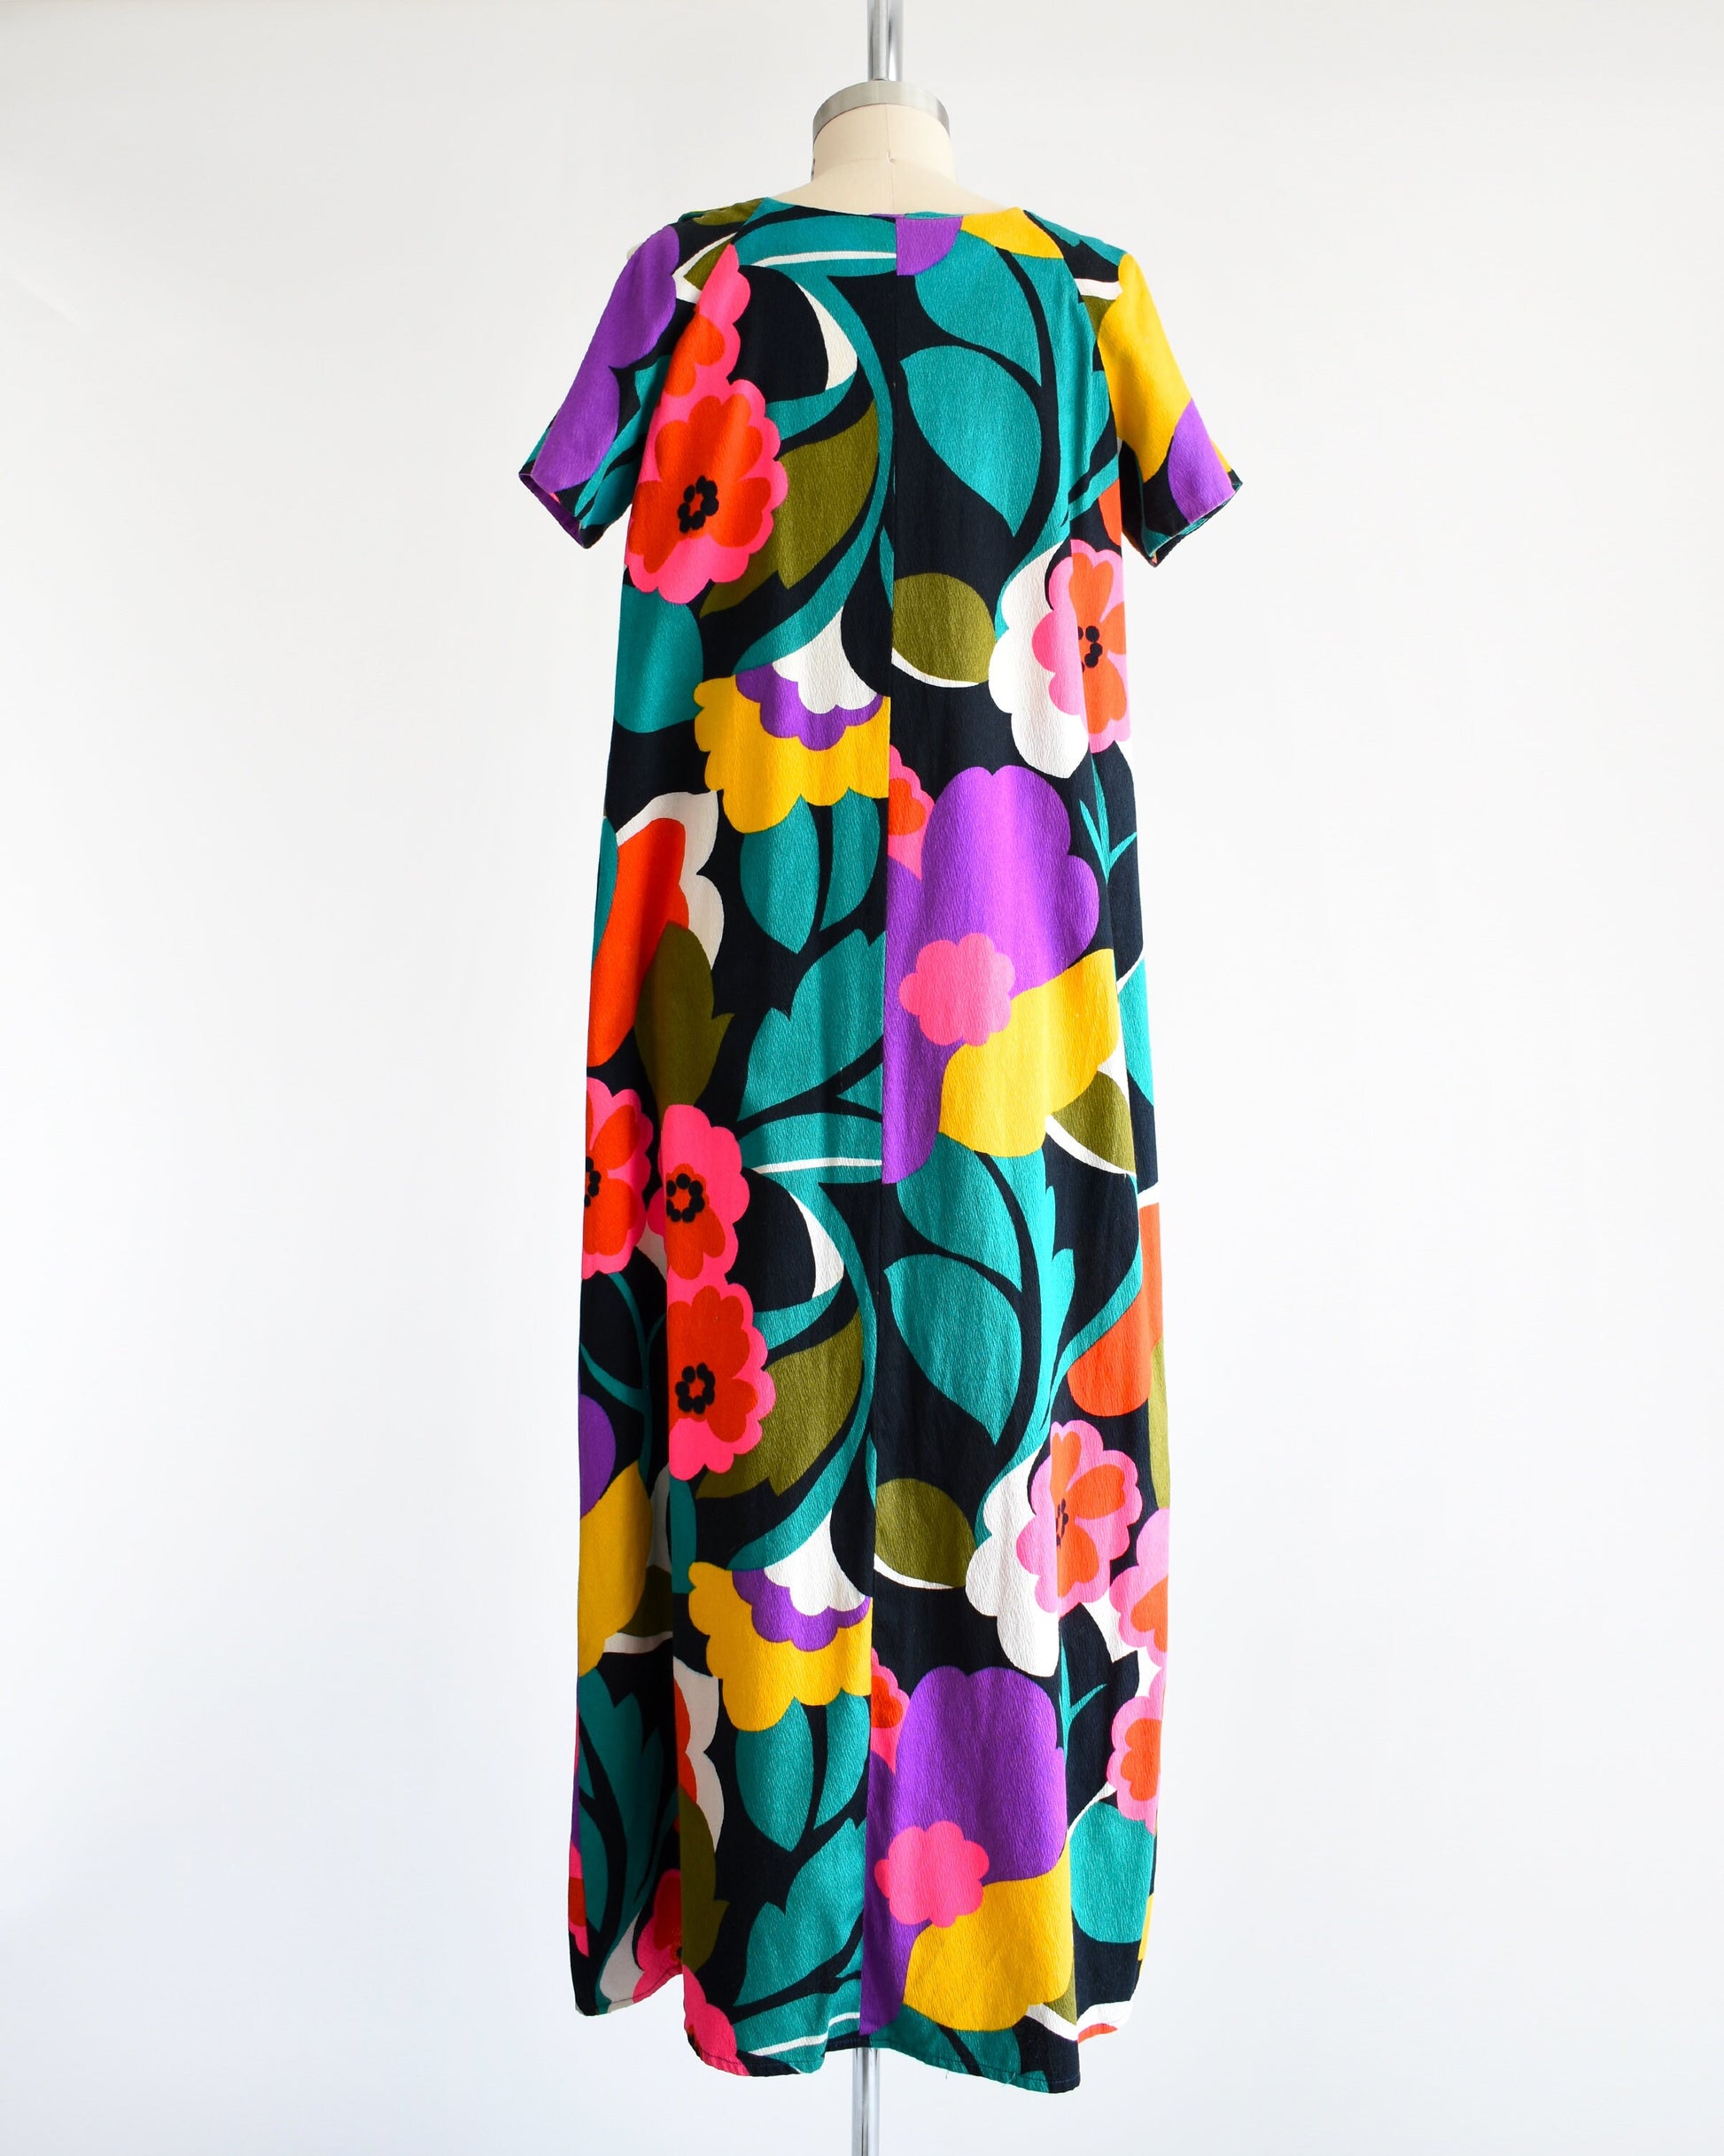 Back view of a vintage 70s Hawaiian floral maxi dress with black woven cotton that has a vibrant flower power print all over. Cold shoulder neckline with two buttons on each side, open shoulders, and short sleeves.